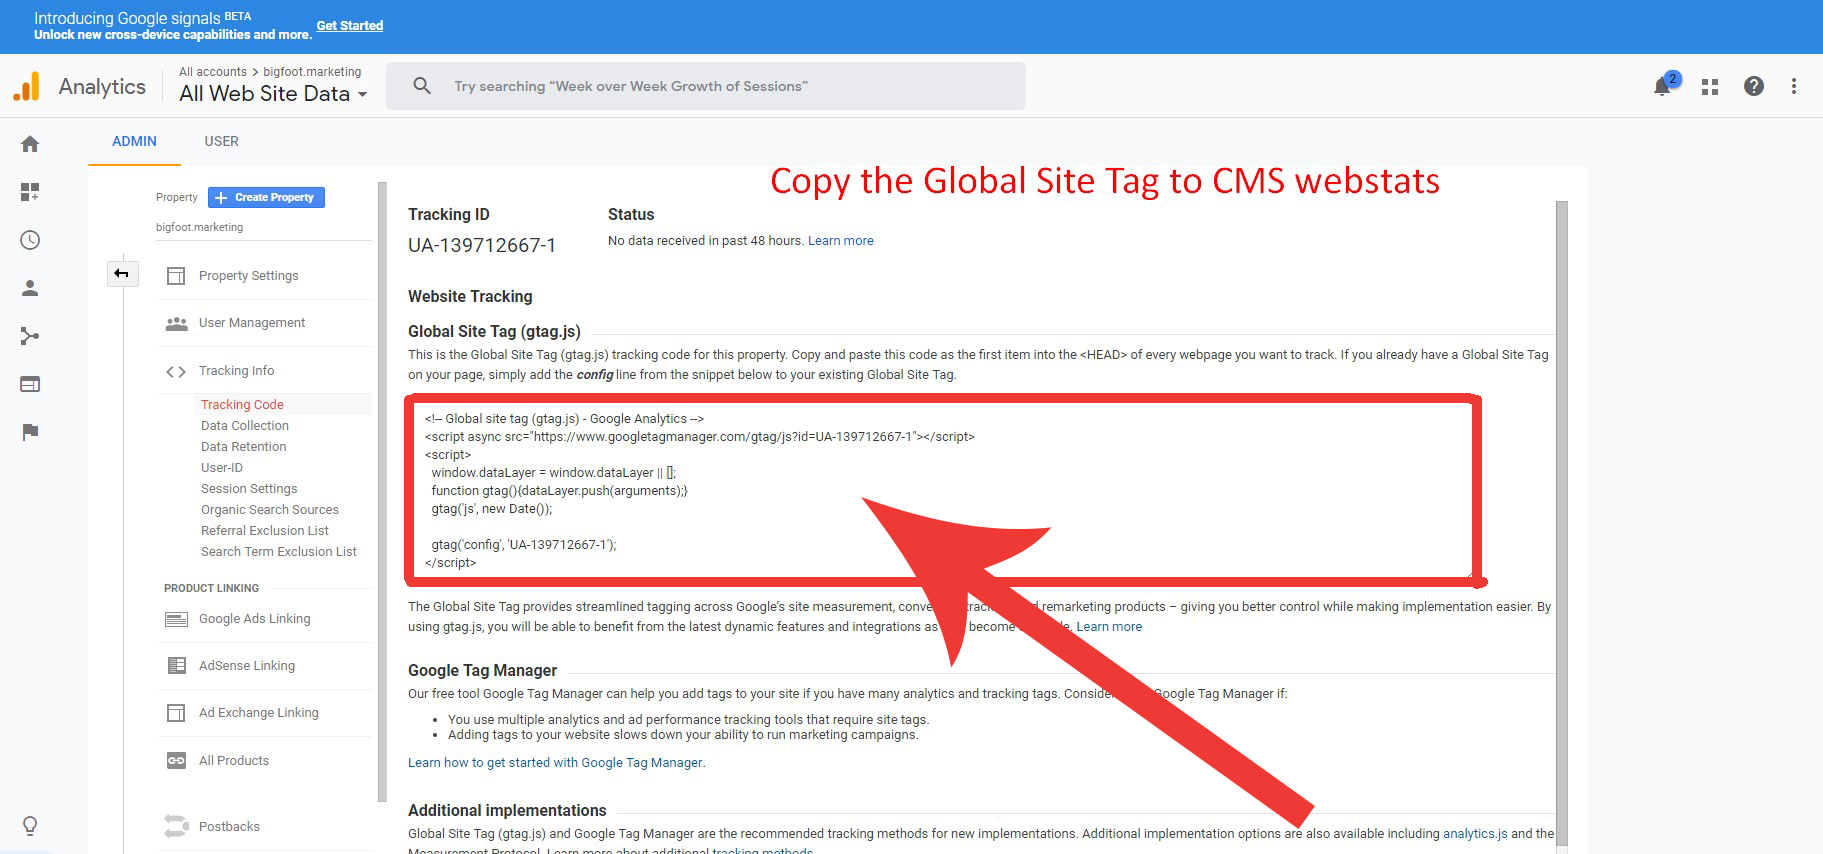 Step 7. Copy the Global Site Tag CMS Webstats